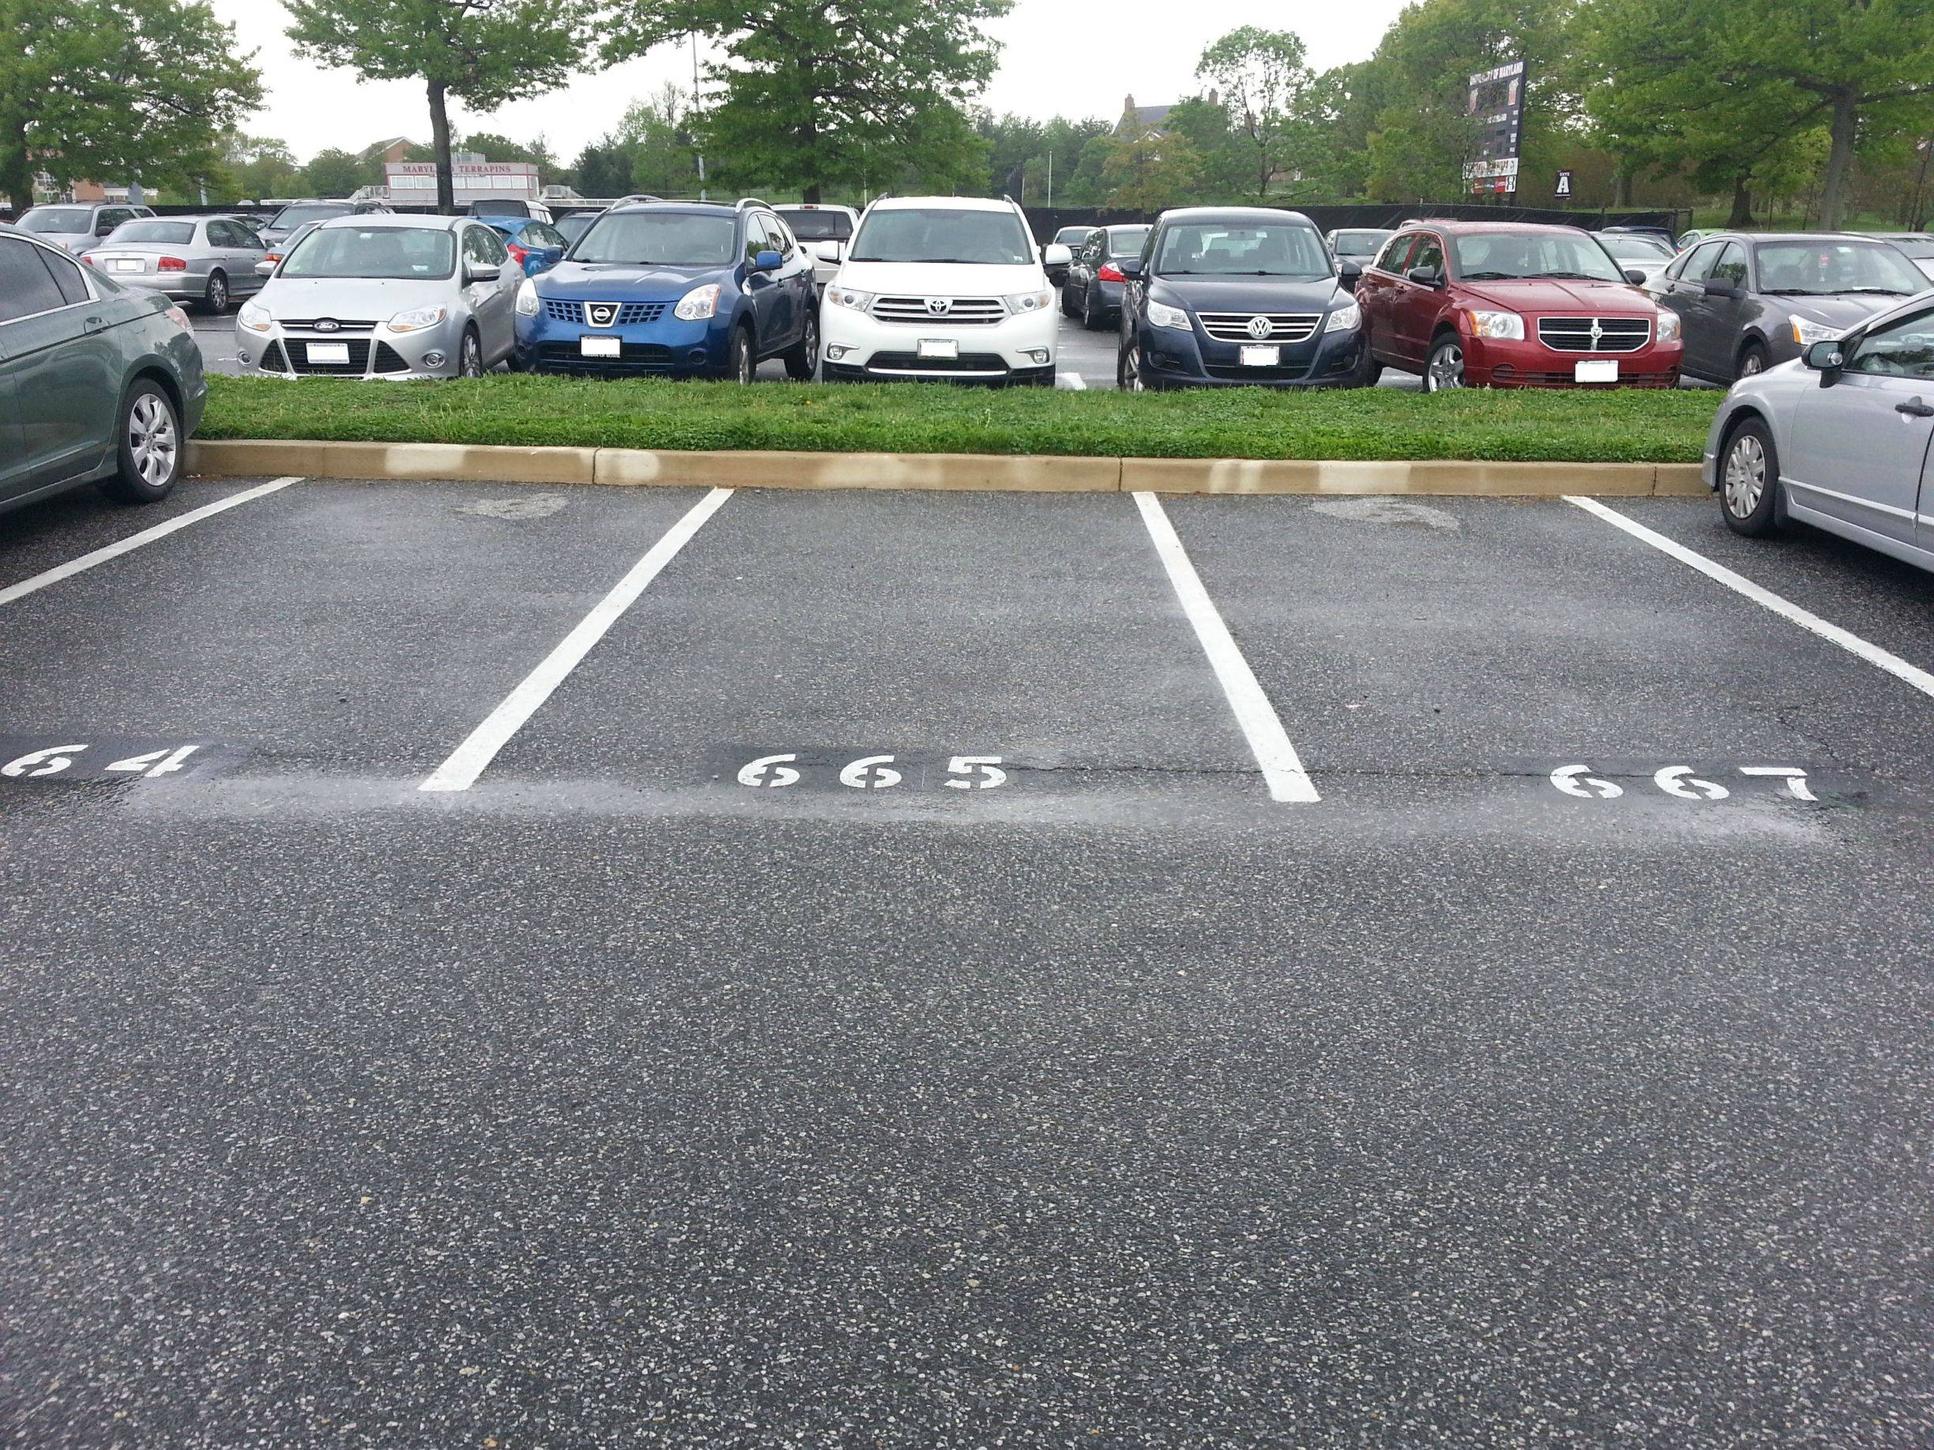 This parking lot skipped a number. : mildlyinteresting